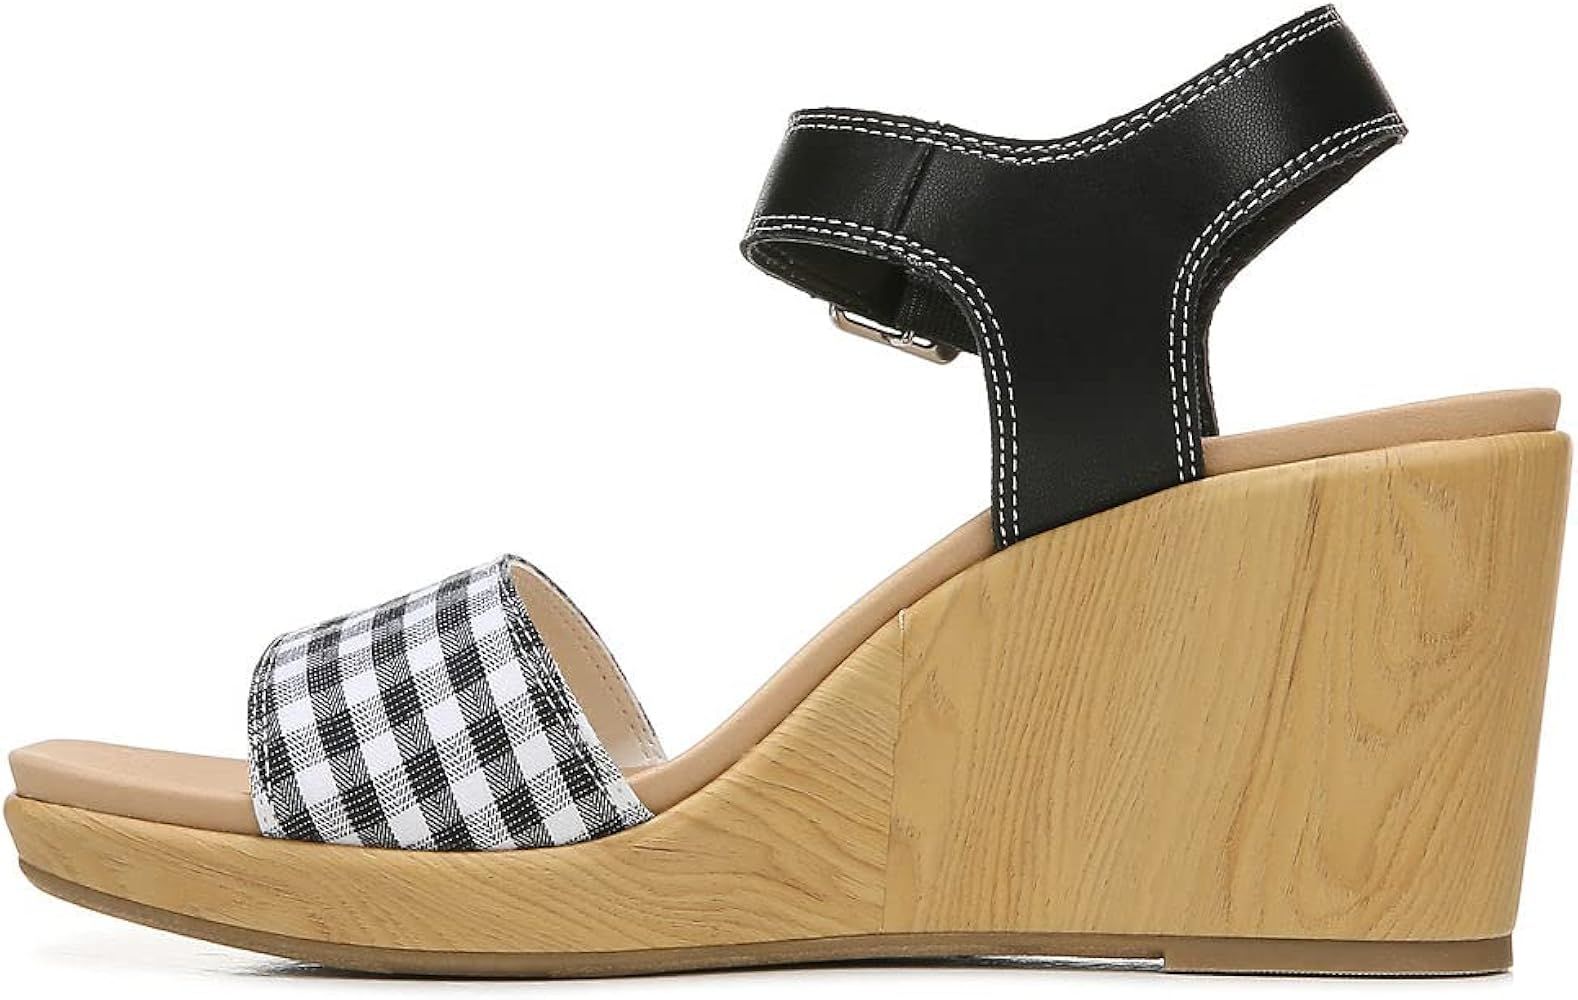 Dr. Scholl's Shoes Women's Glimmer Wedge Sandal | Amazon (US)